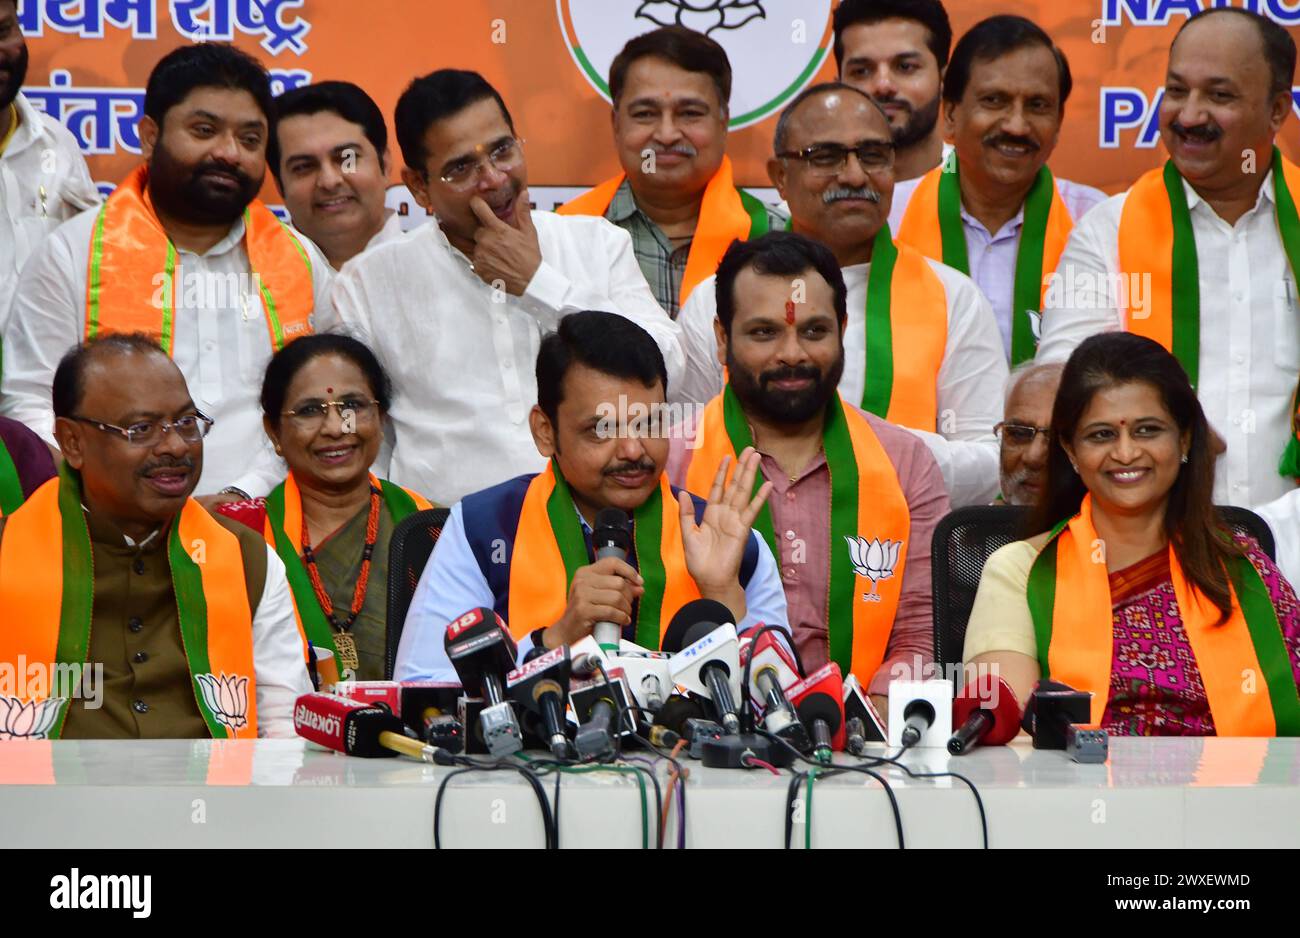 MUMBAI, INDIA - MARCH 30: Former Lok Sabha Speaker Shivraj Patil's daughter Archana Patil Chakurkar joins BJP in the presence of Maharashtra Dy CM Devendra Fadnavis and Maharashtra BJP President Chandrashekar Bawankule, on March 30, 2024 in Mumbai, India. Archana Patil said she has been associated with social work for the last two decades and decided to choose the BJP for politics. Shivraj Patil, who hails from Latur in Marathwada region of Maharashtra, was Union home minister during the UPA-I government, but stepped down in the wake of the 26/11 Mumbai terror attacks. (Photo by Bhushan Koyand Stock Photo